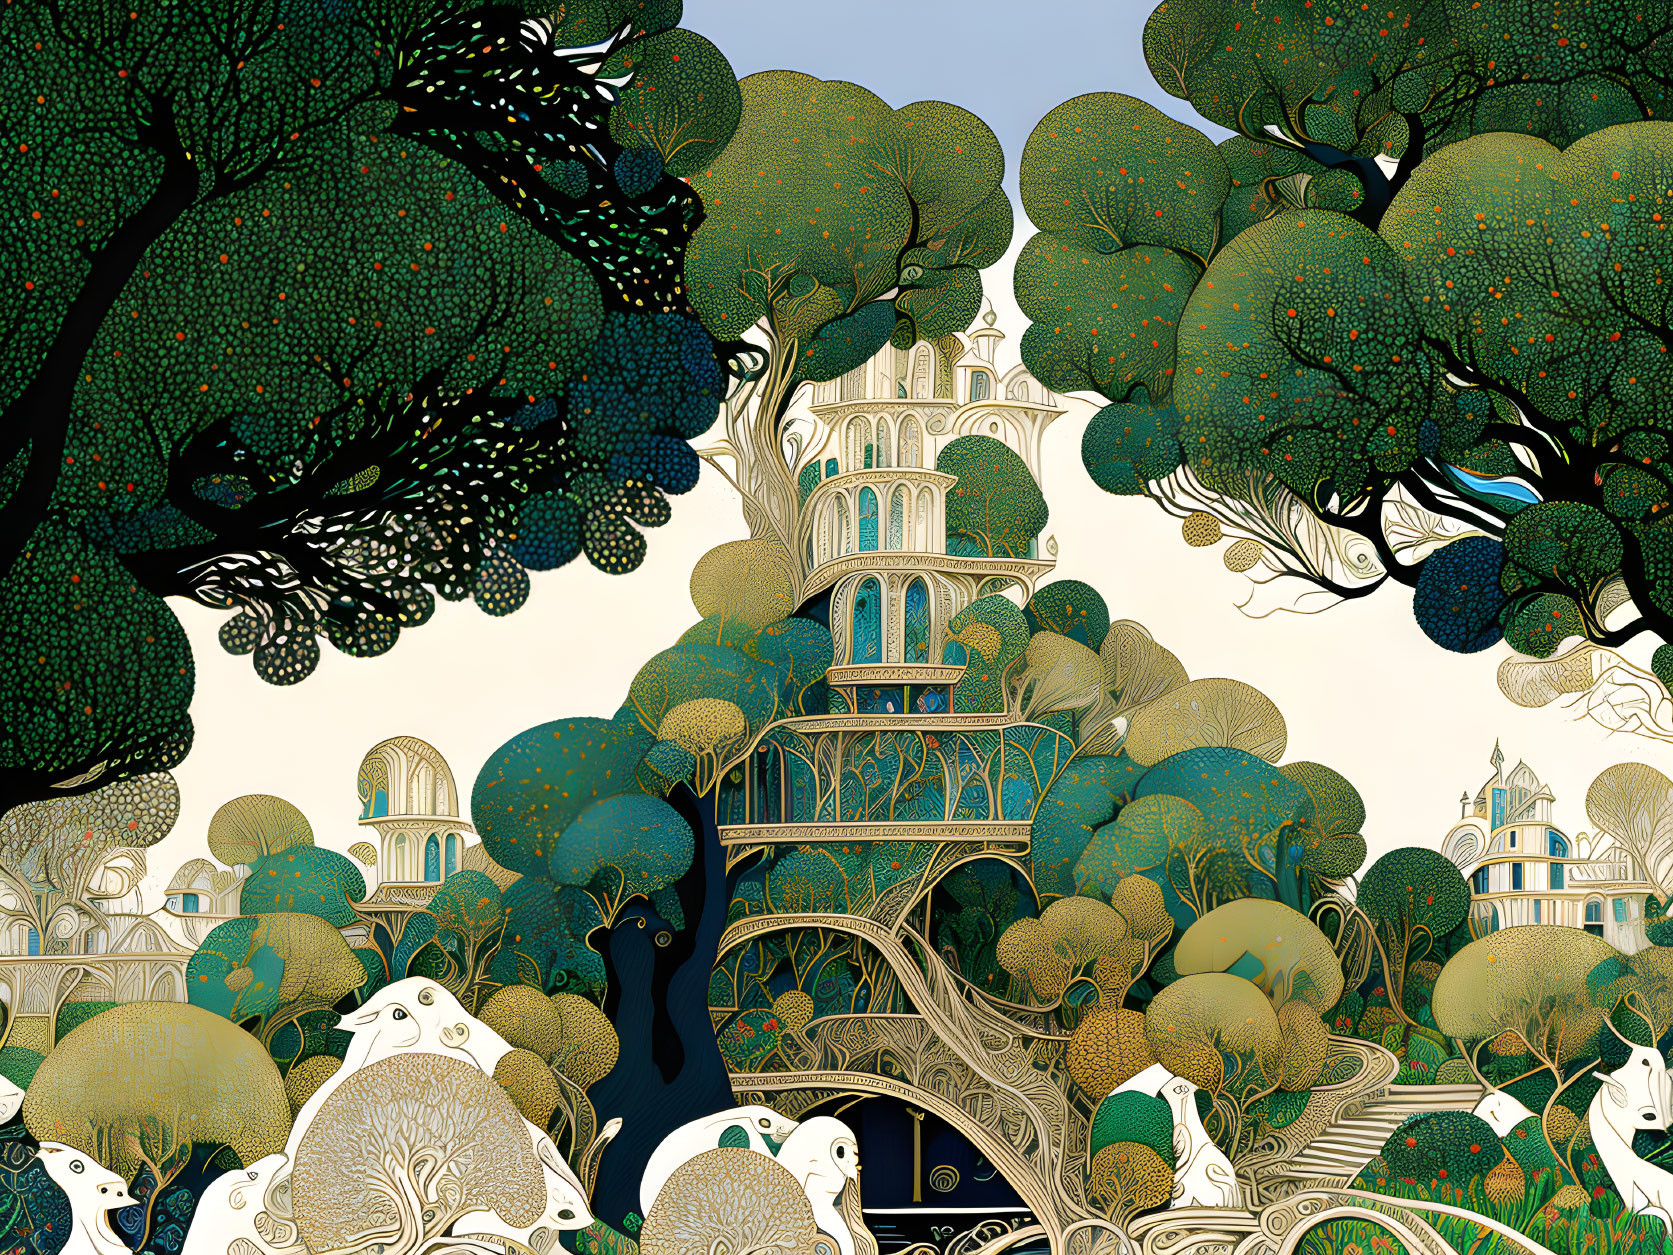 Detailed illustration of whimsical tree-filled landscape with greenery and unique buildings.